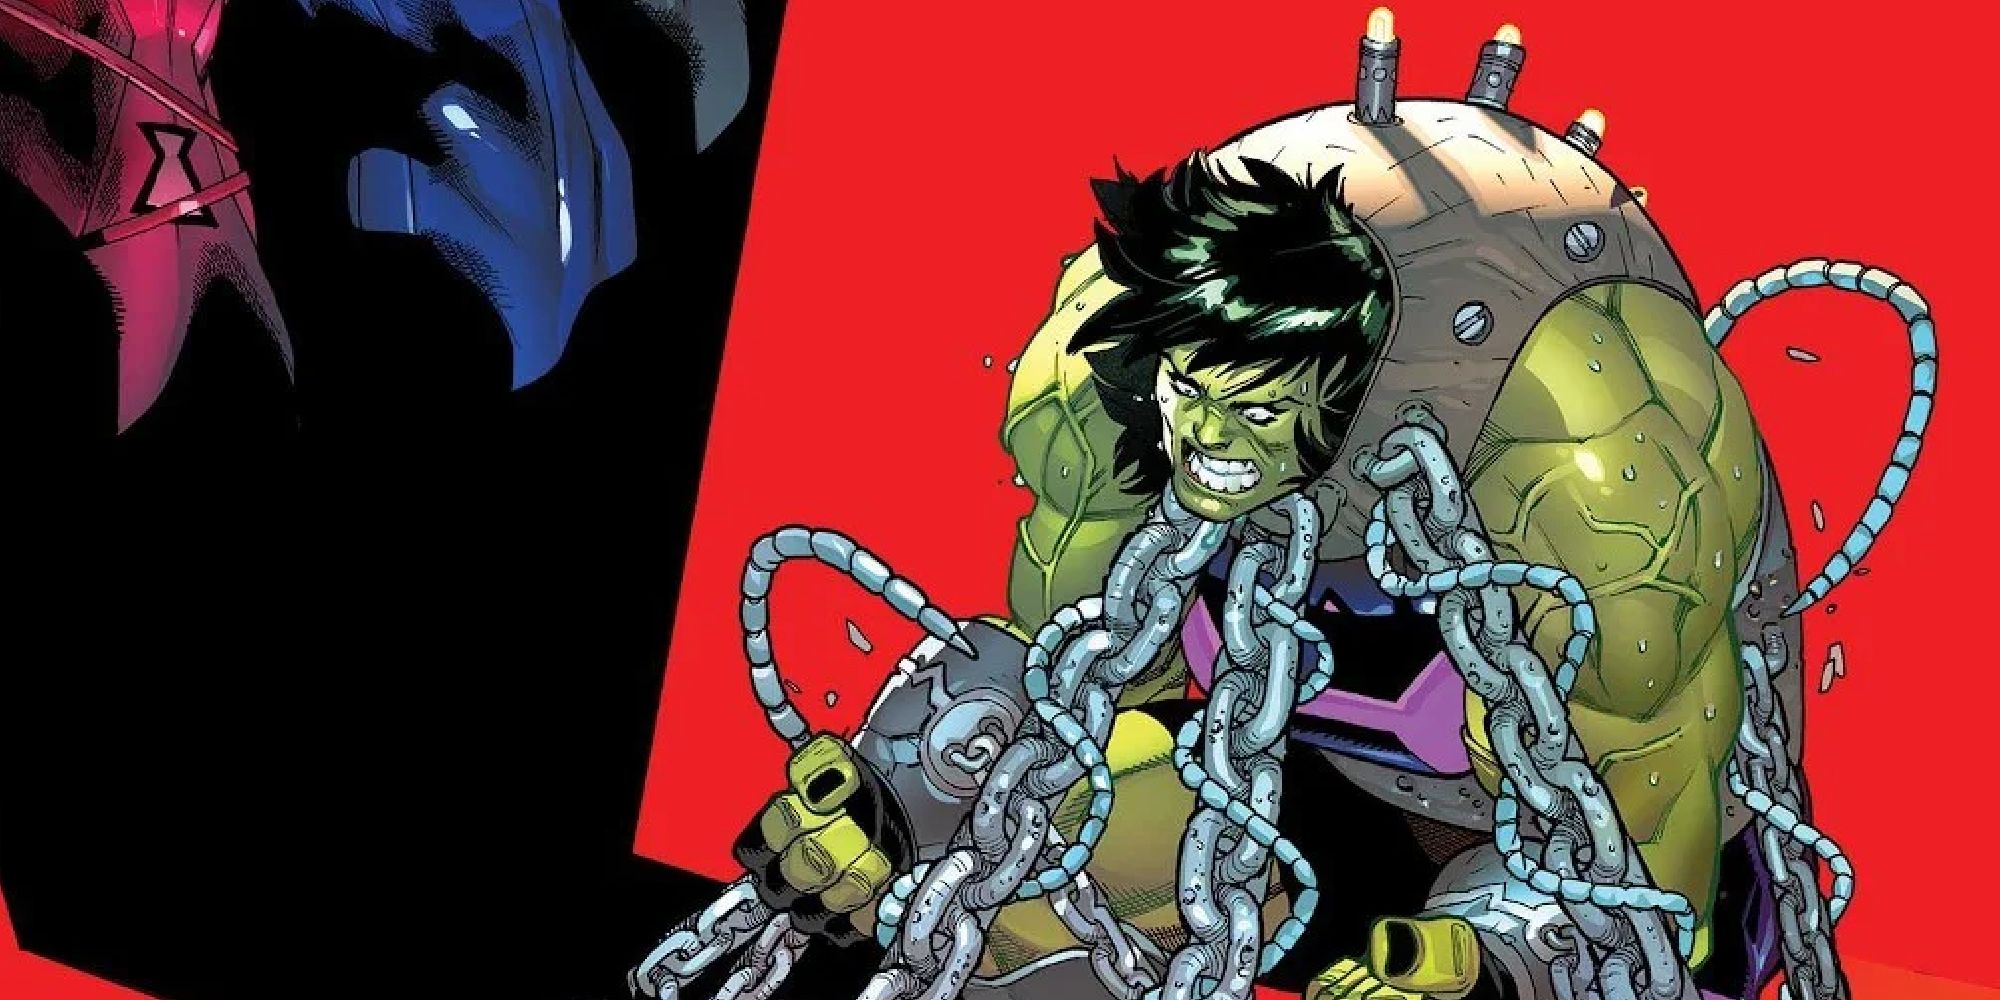 She-Hulk bound by chains on the cover of an Avengers comic